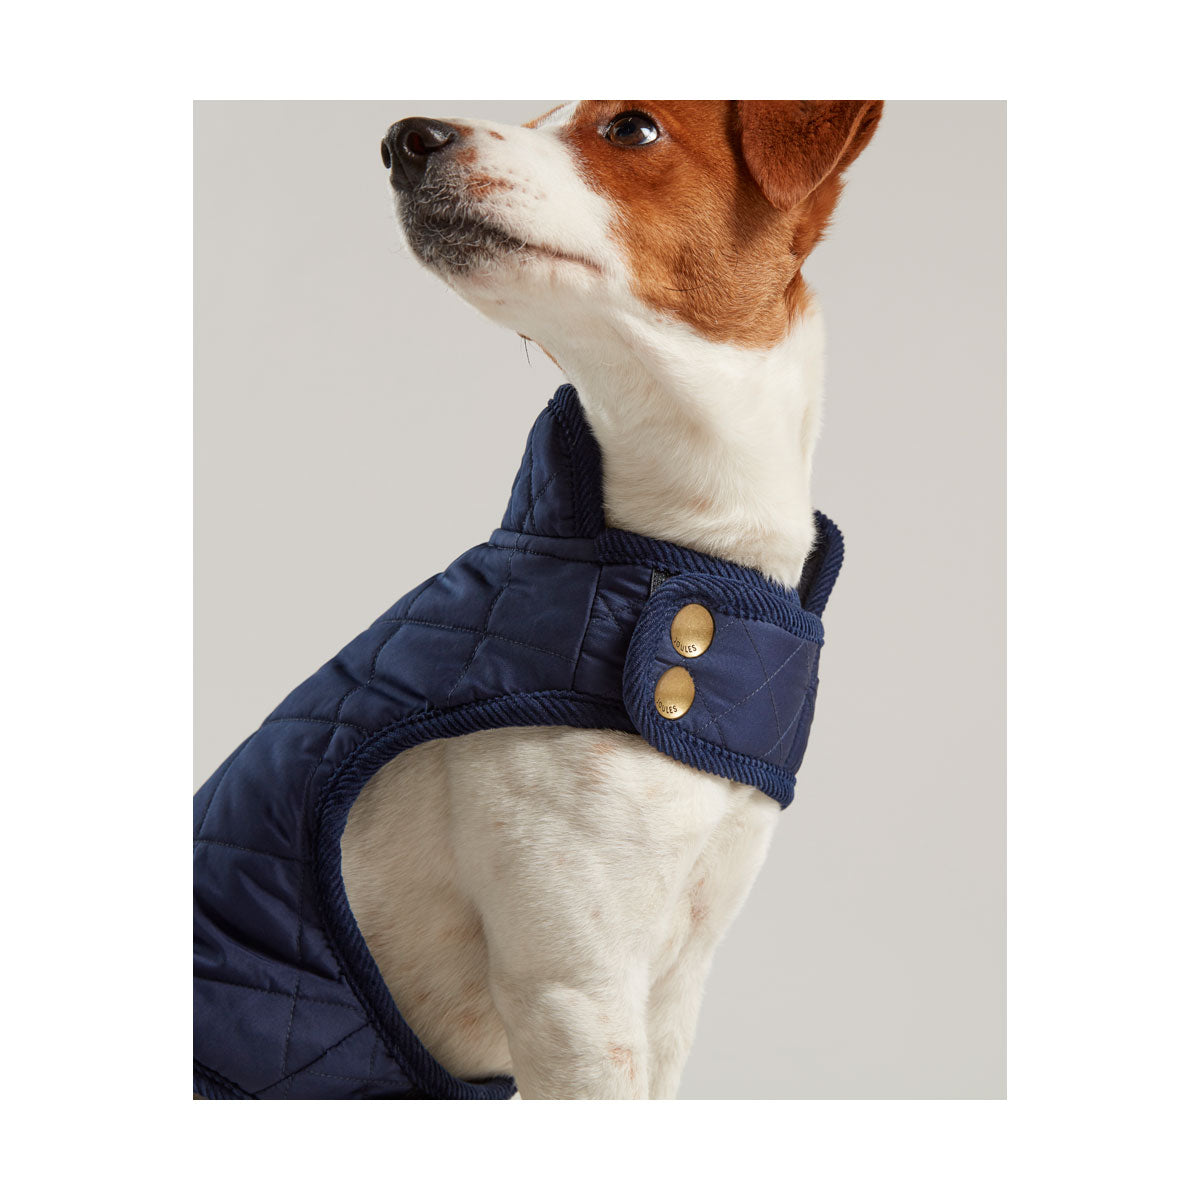 Joules Quilted Dog Coat Dog Coat Barnstaple Equestrian Supplies